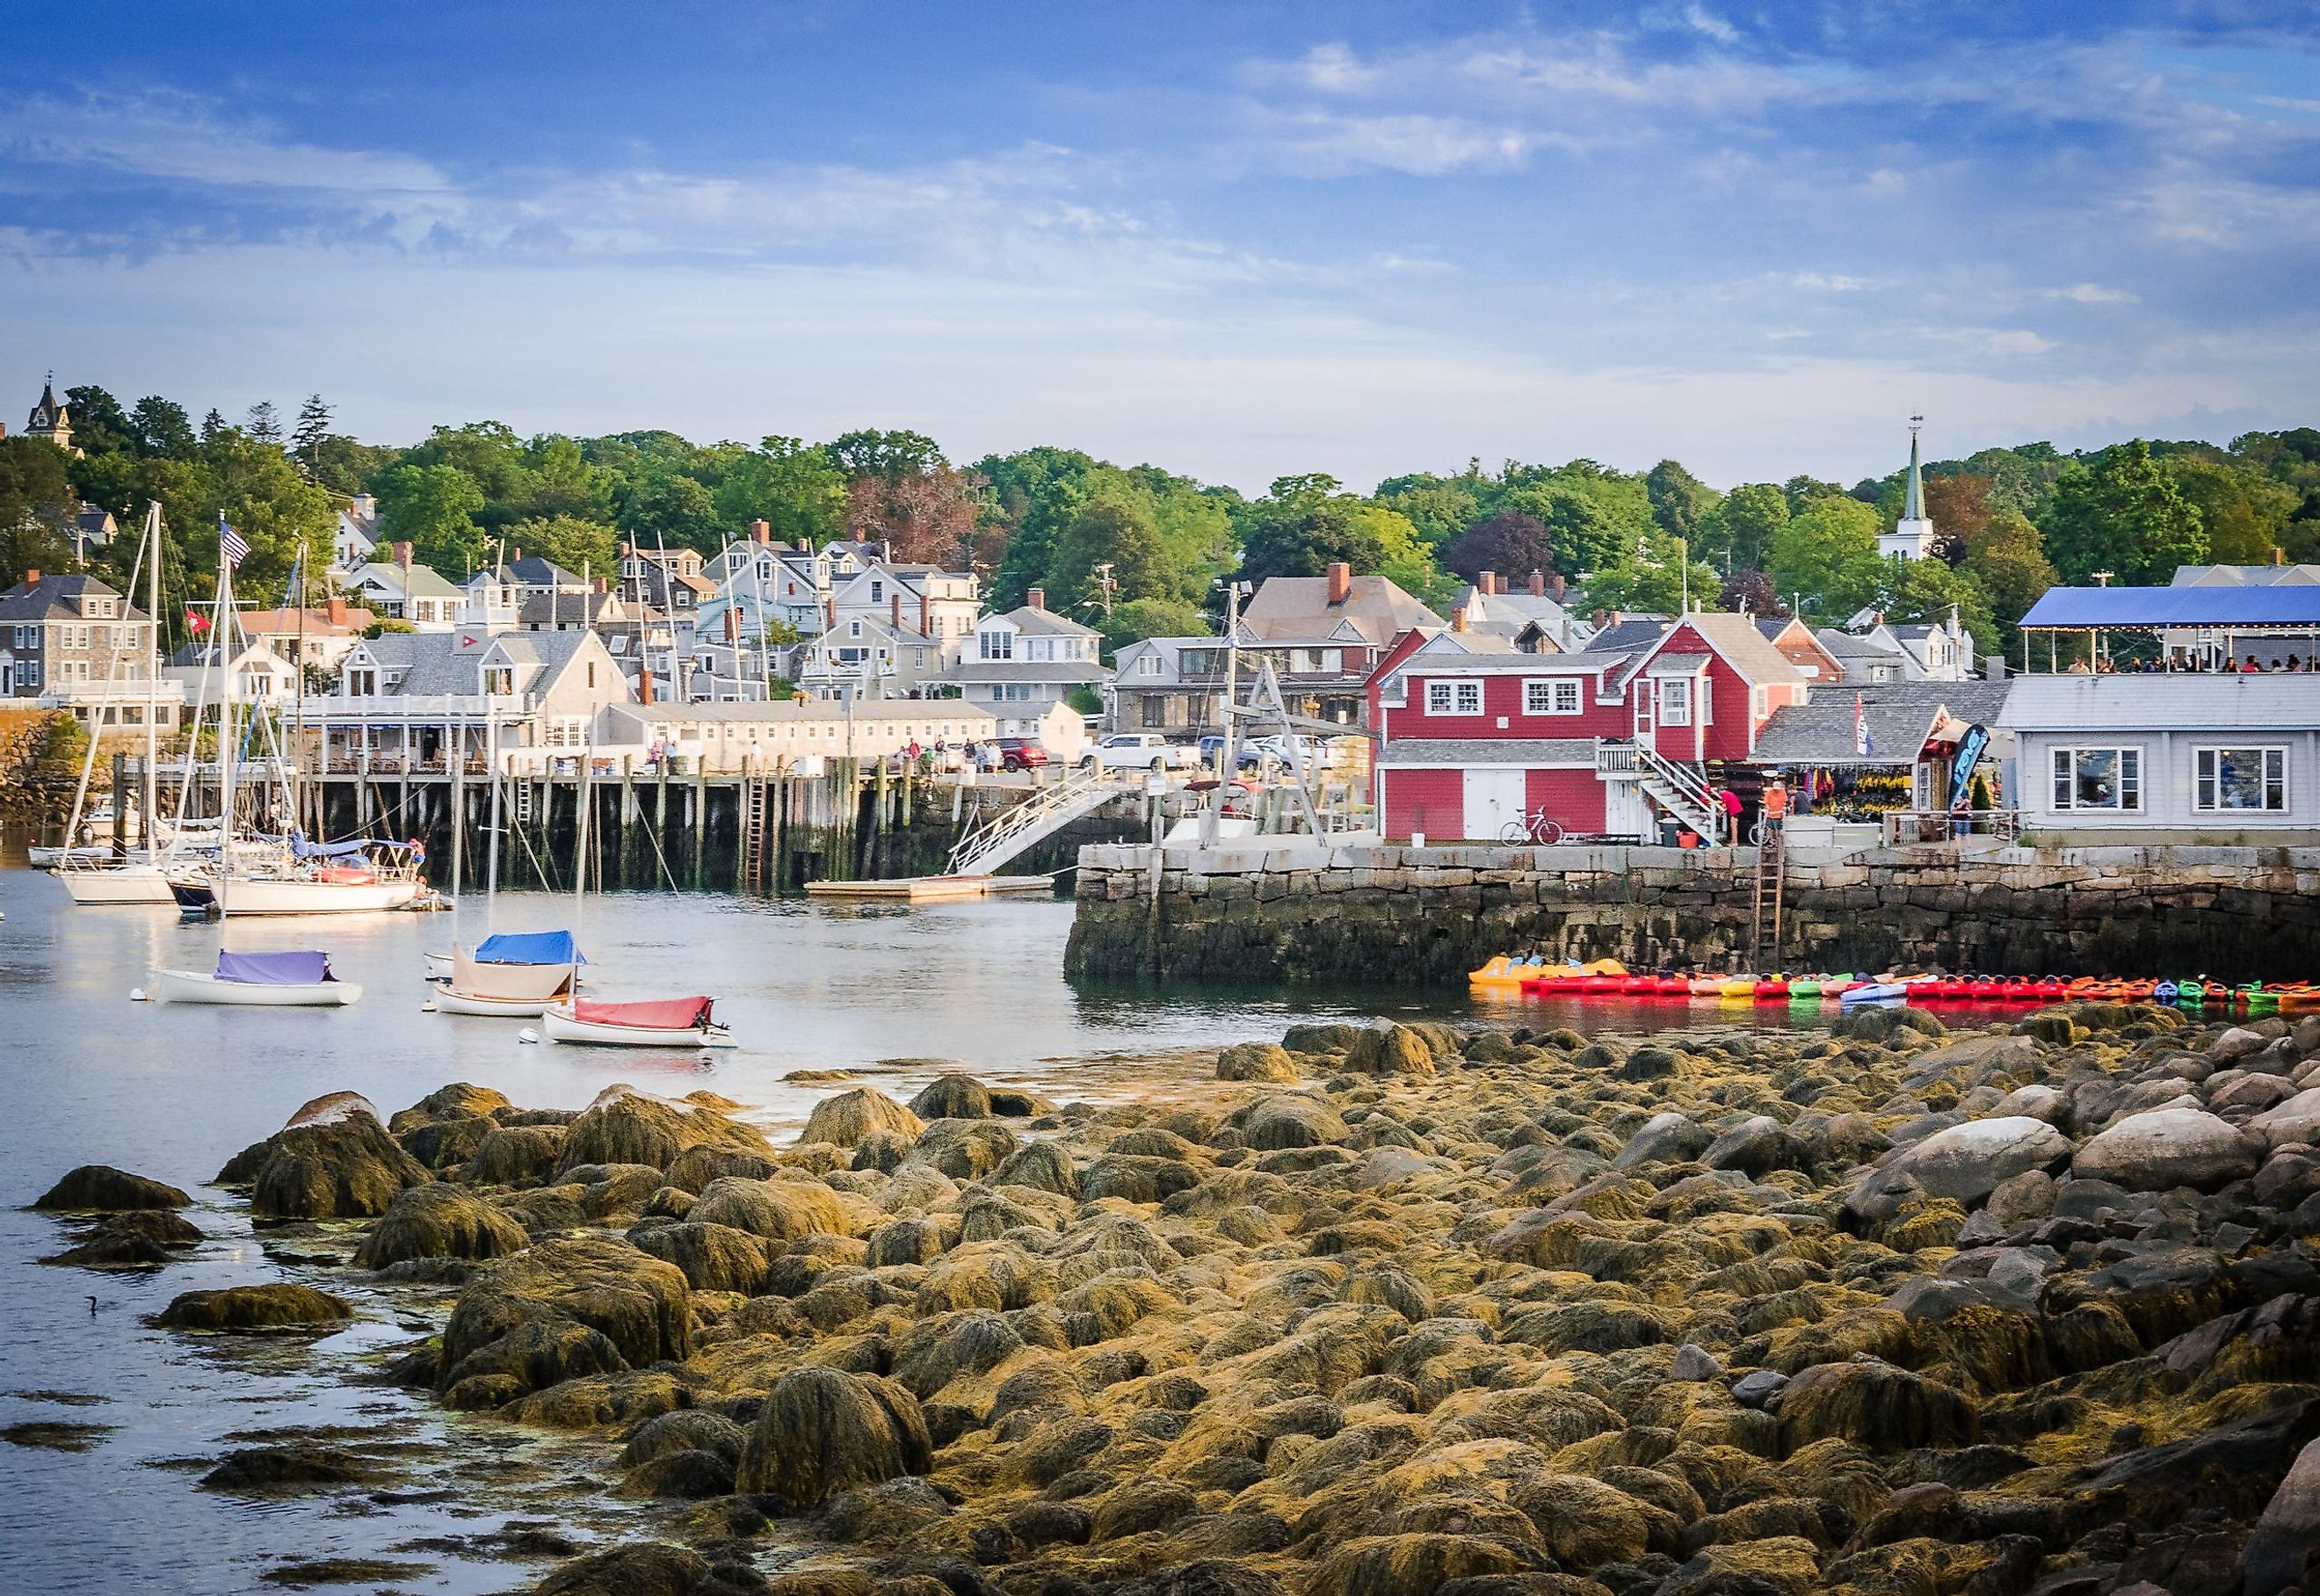 Blue sky summer day overlooking the beautiful, colorful, and iconic seaside harbor town of Rockport, Massachusetts